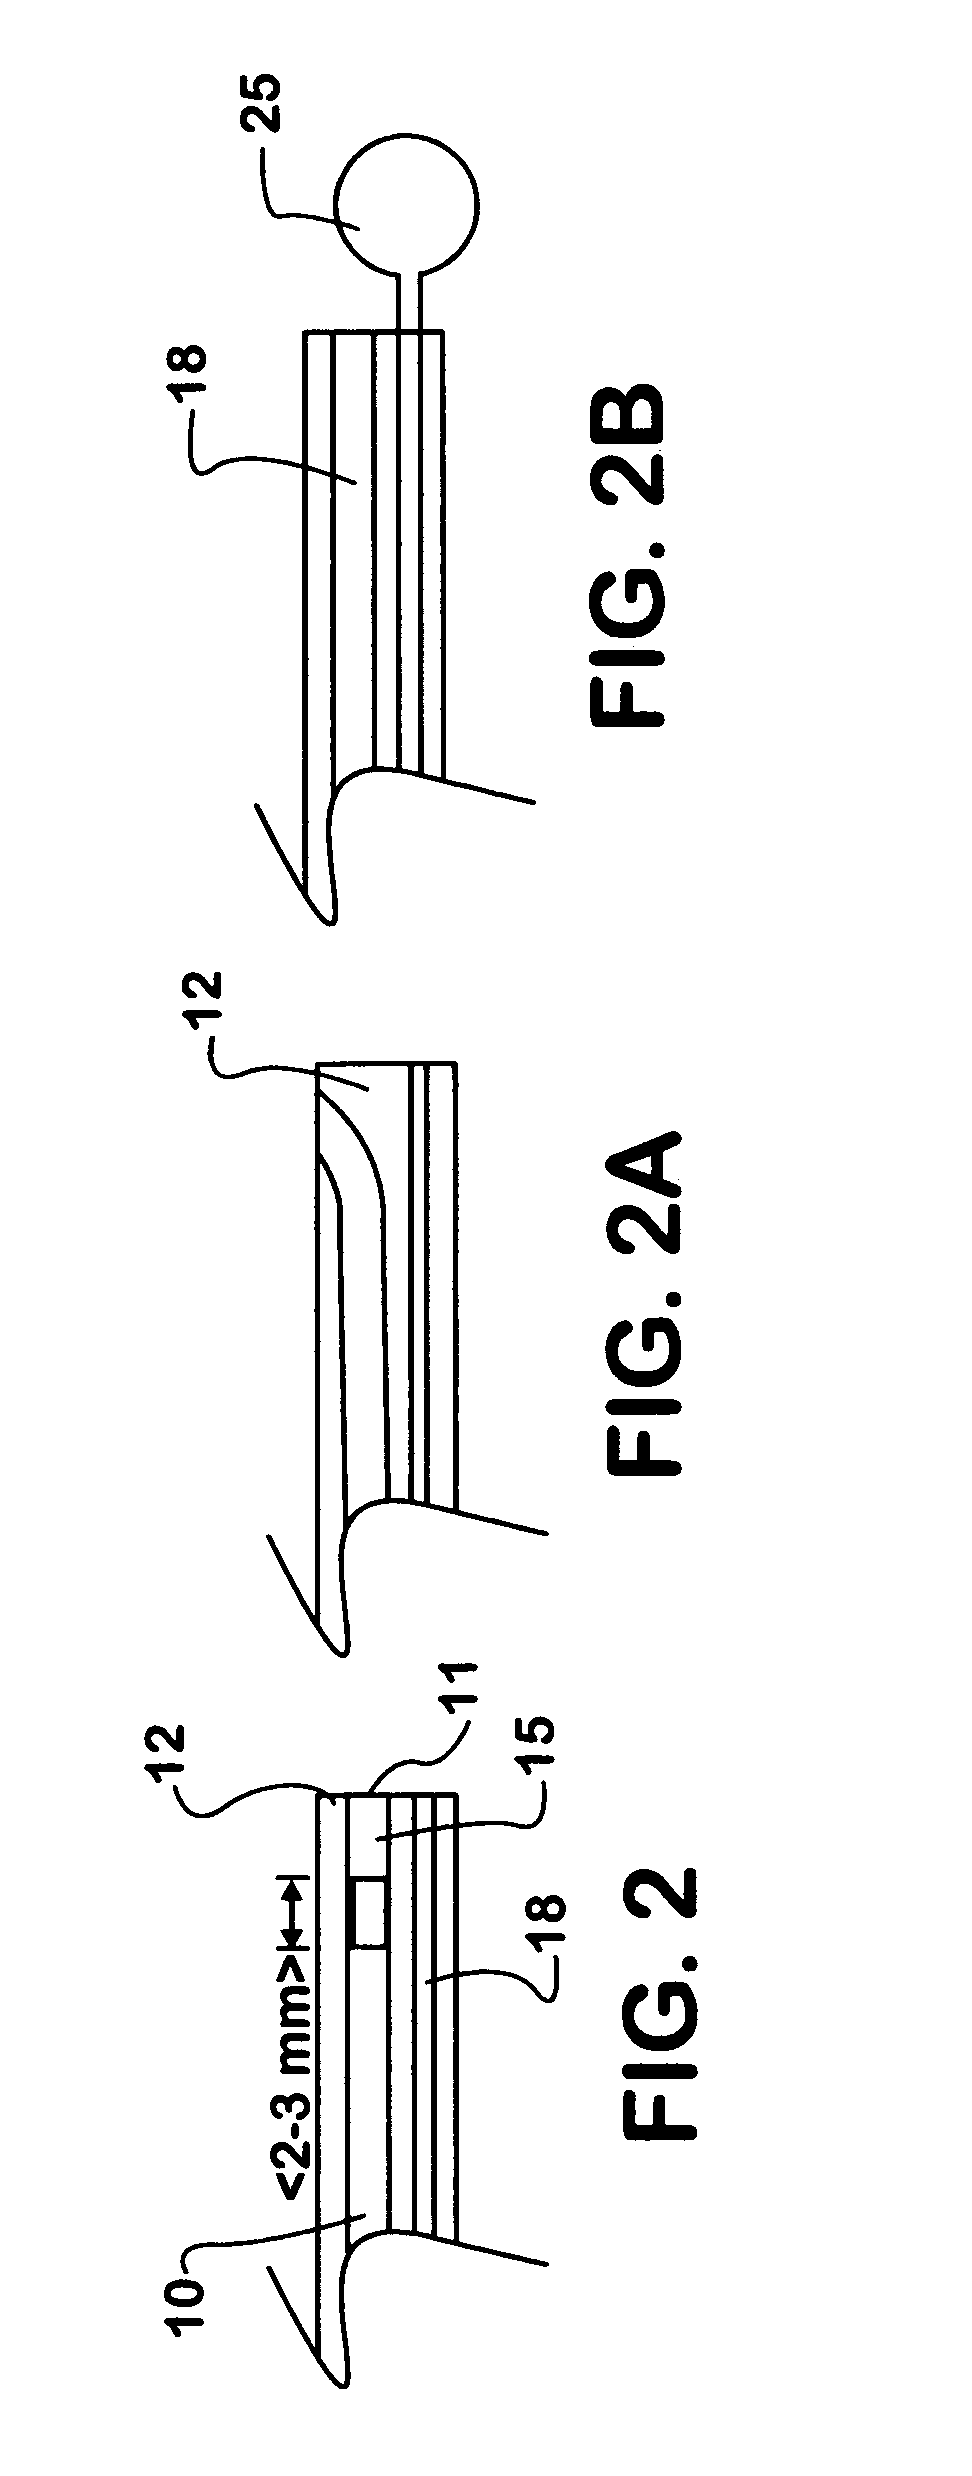 Electromagnetic photonic catheter for reducing restenosis